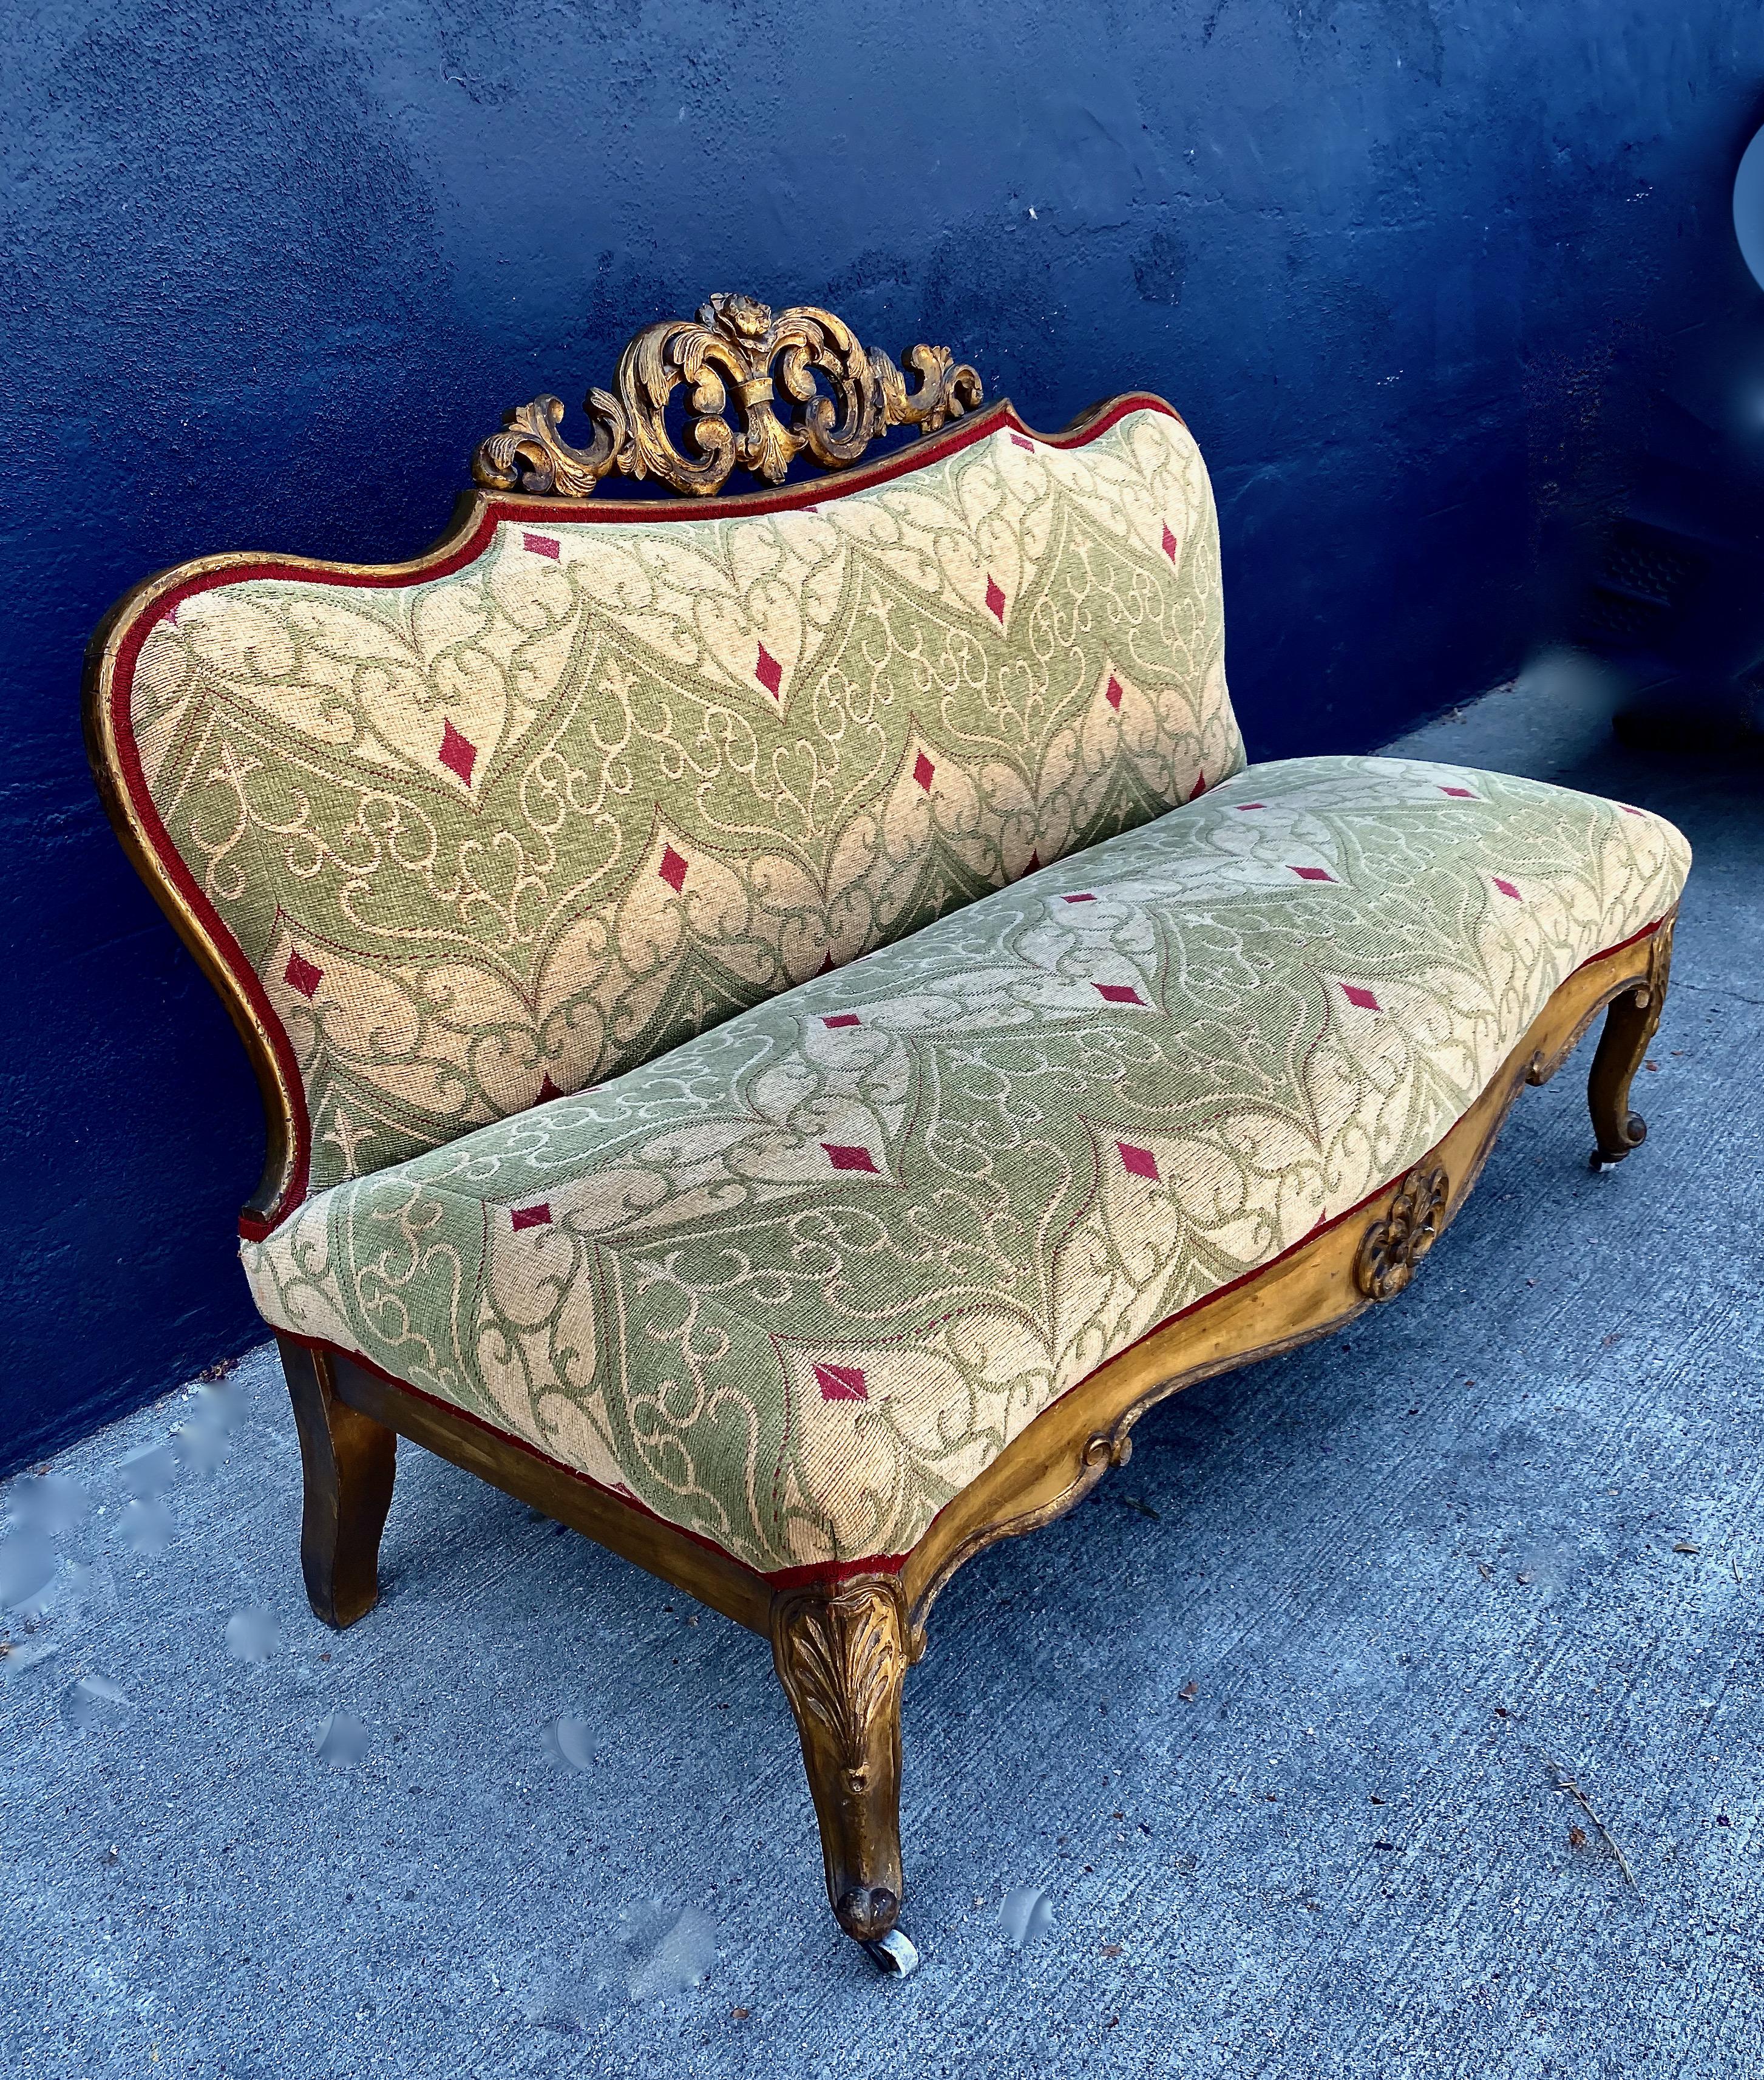 19th Century Rococo-Style Gilt Settee or Bench For Sale 3